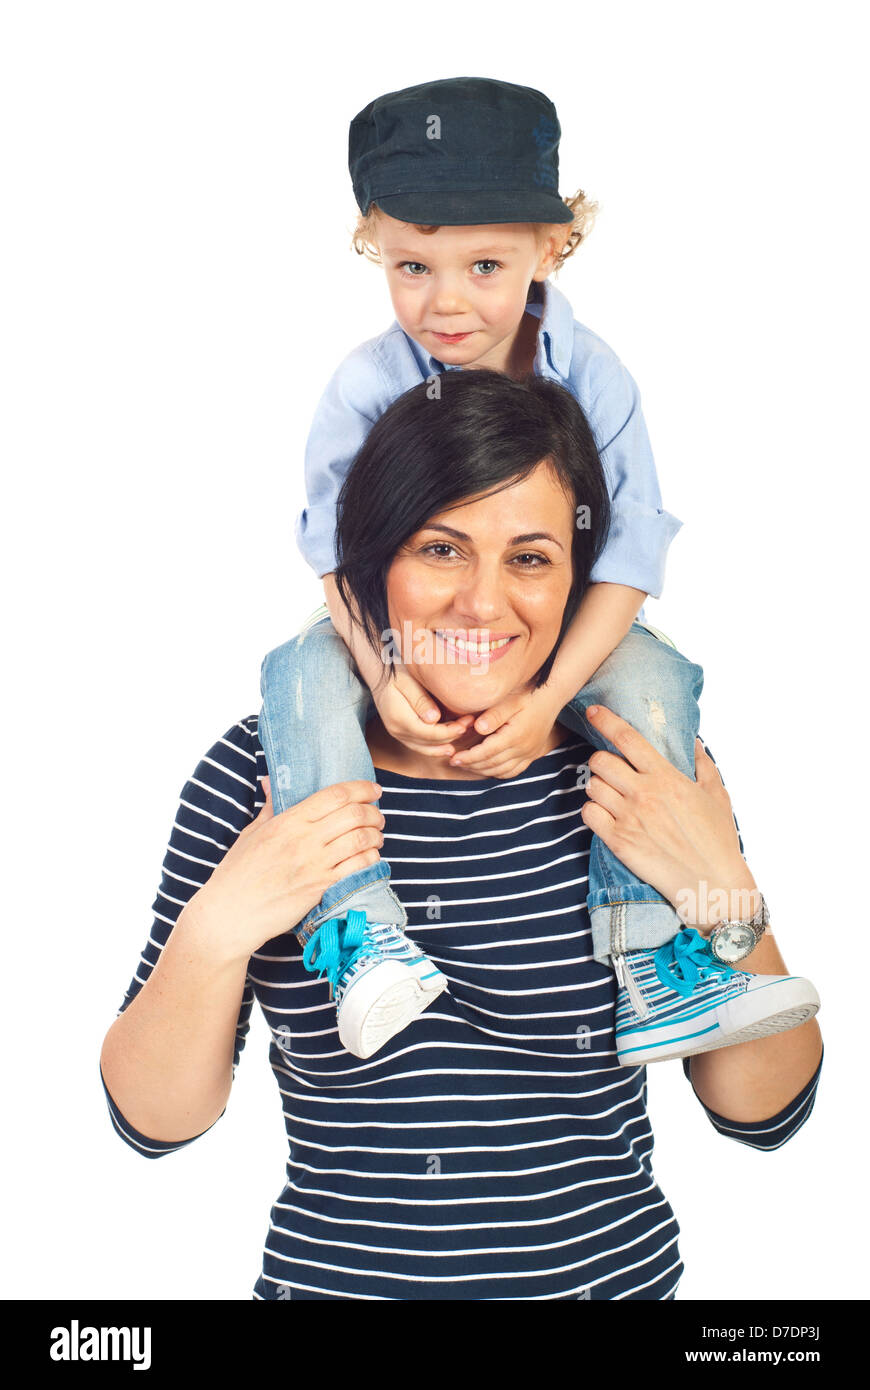 Boy riding mother in piggy back isolated on white background Stock Photo